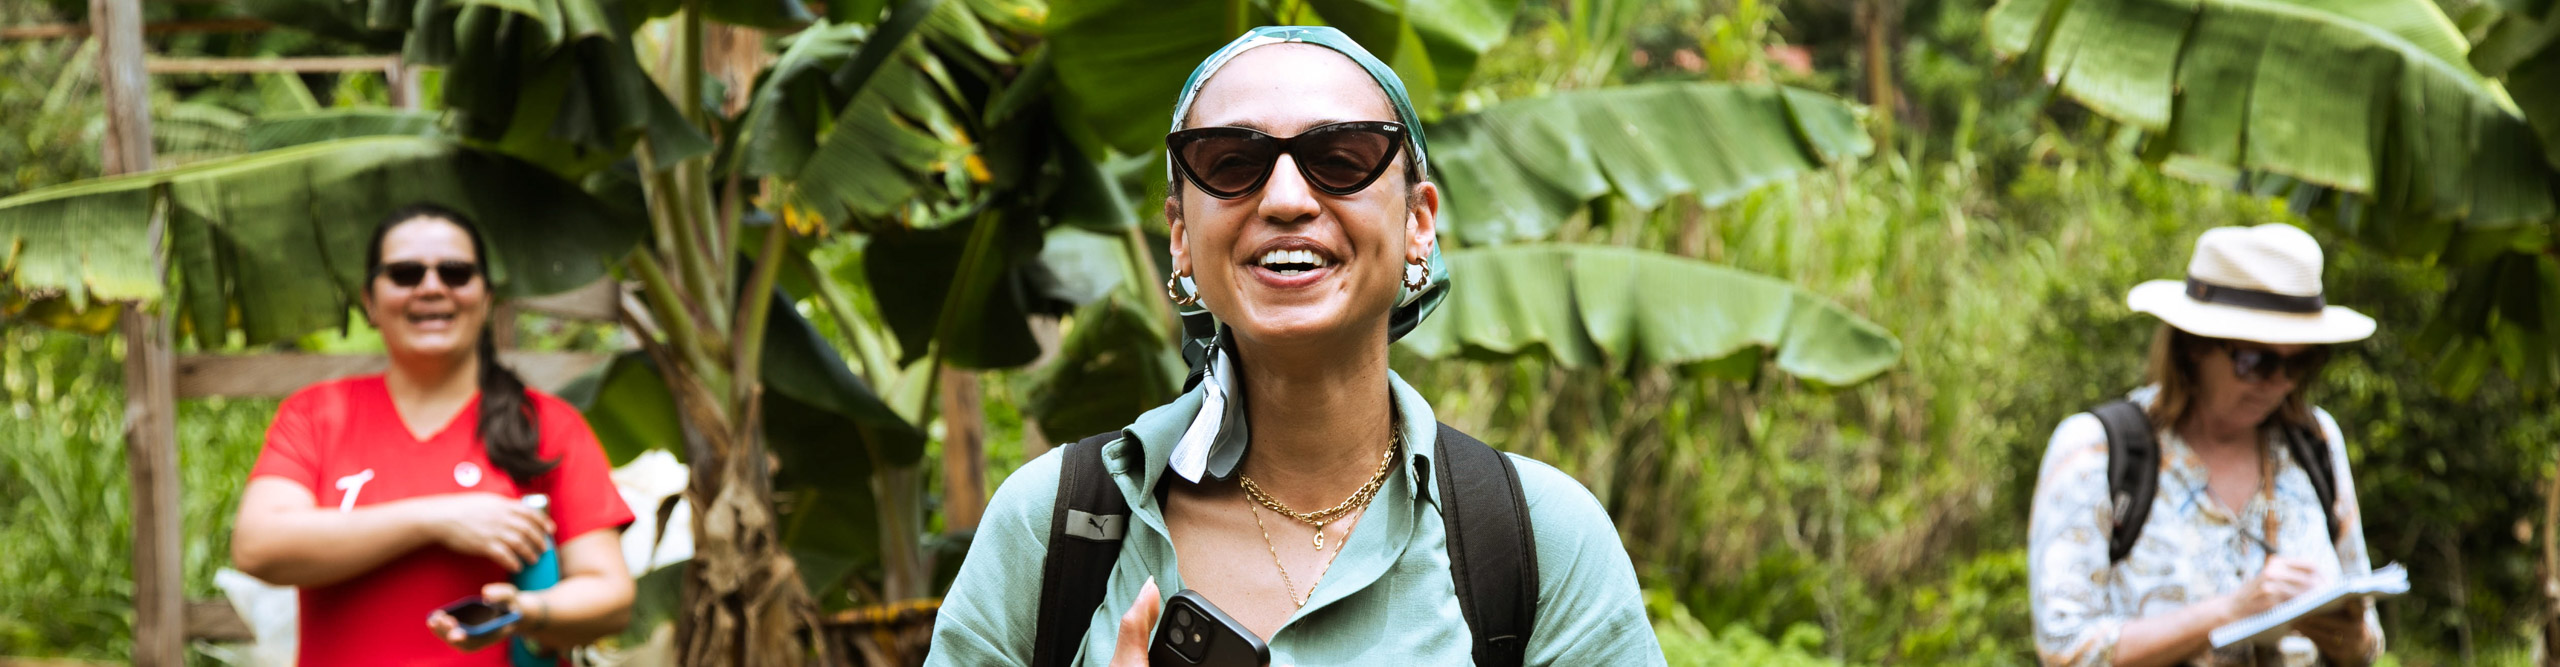 Travellers smiling at camera in the jungle in Costa Rica